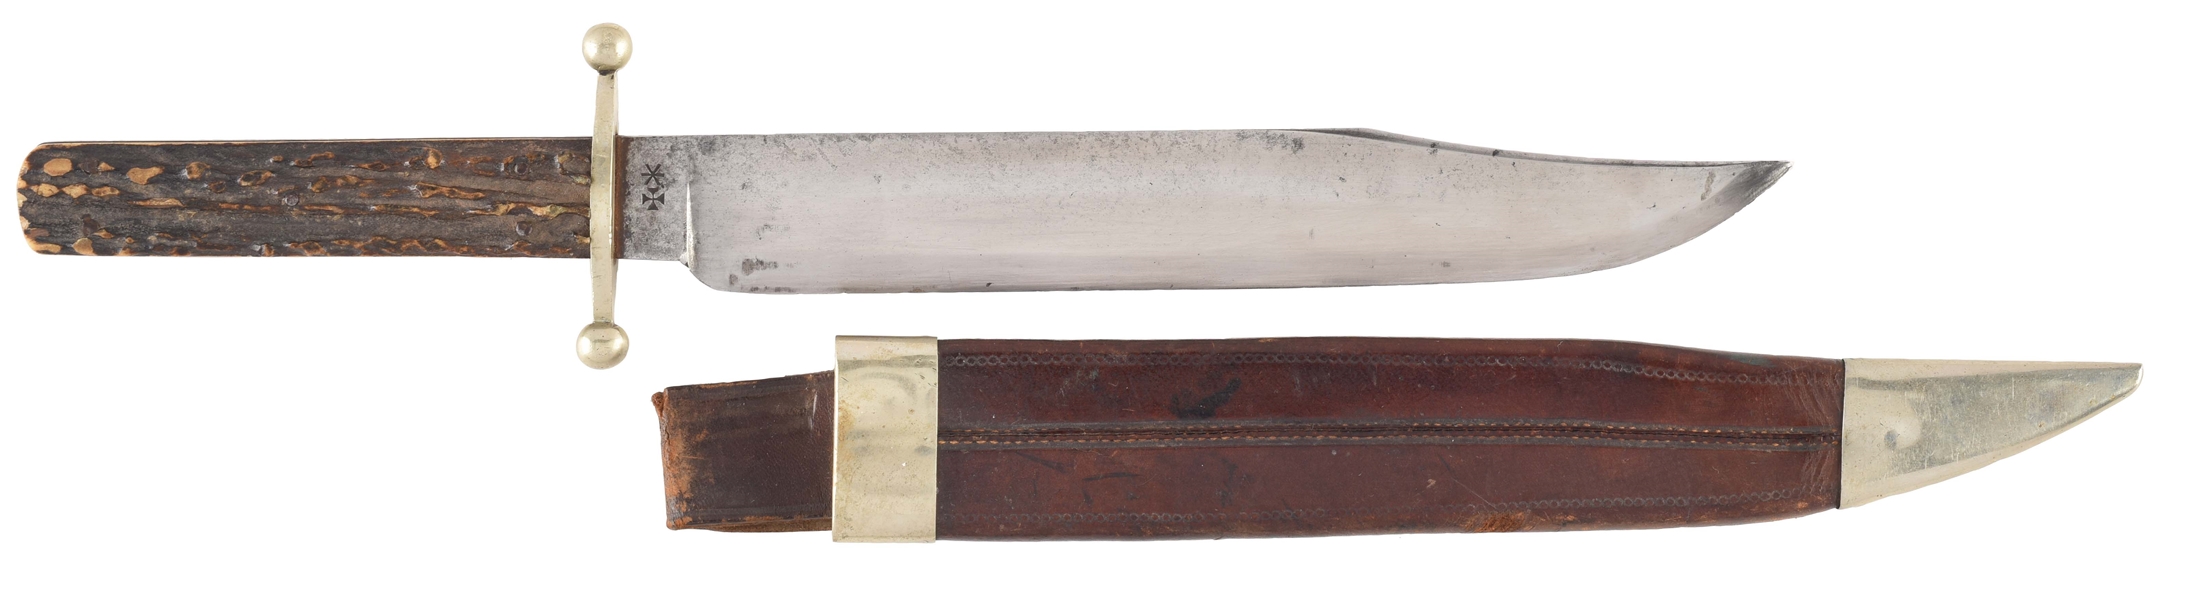 VERY LARGE JOSEPH ROGERS & SONS STAG HANDLED KNIFE WITH SHEATH.